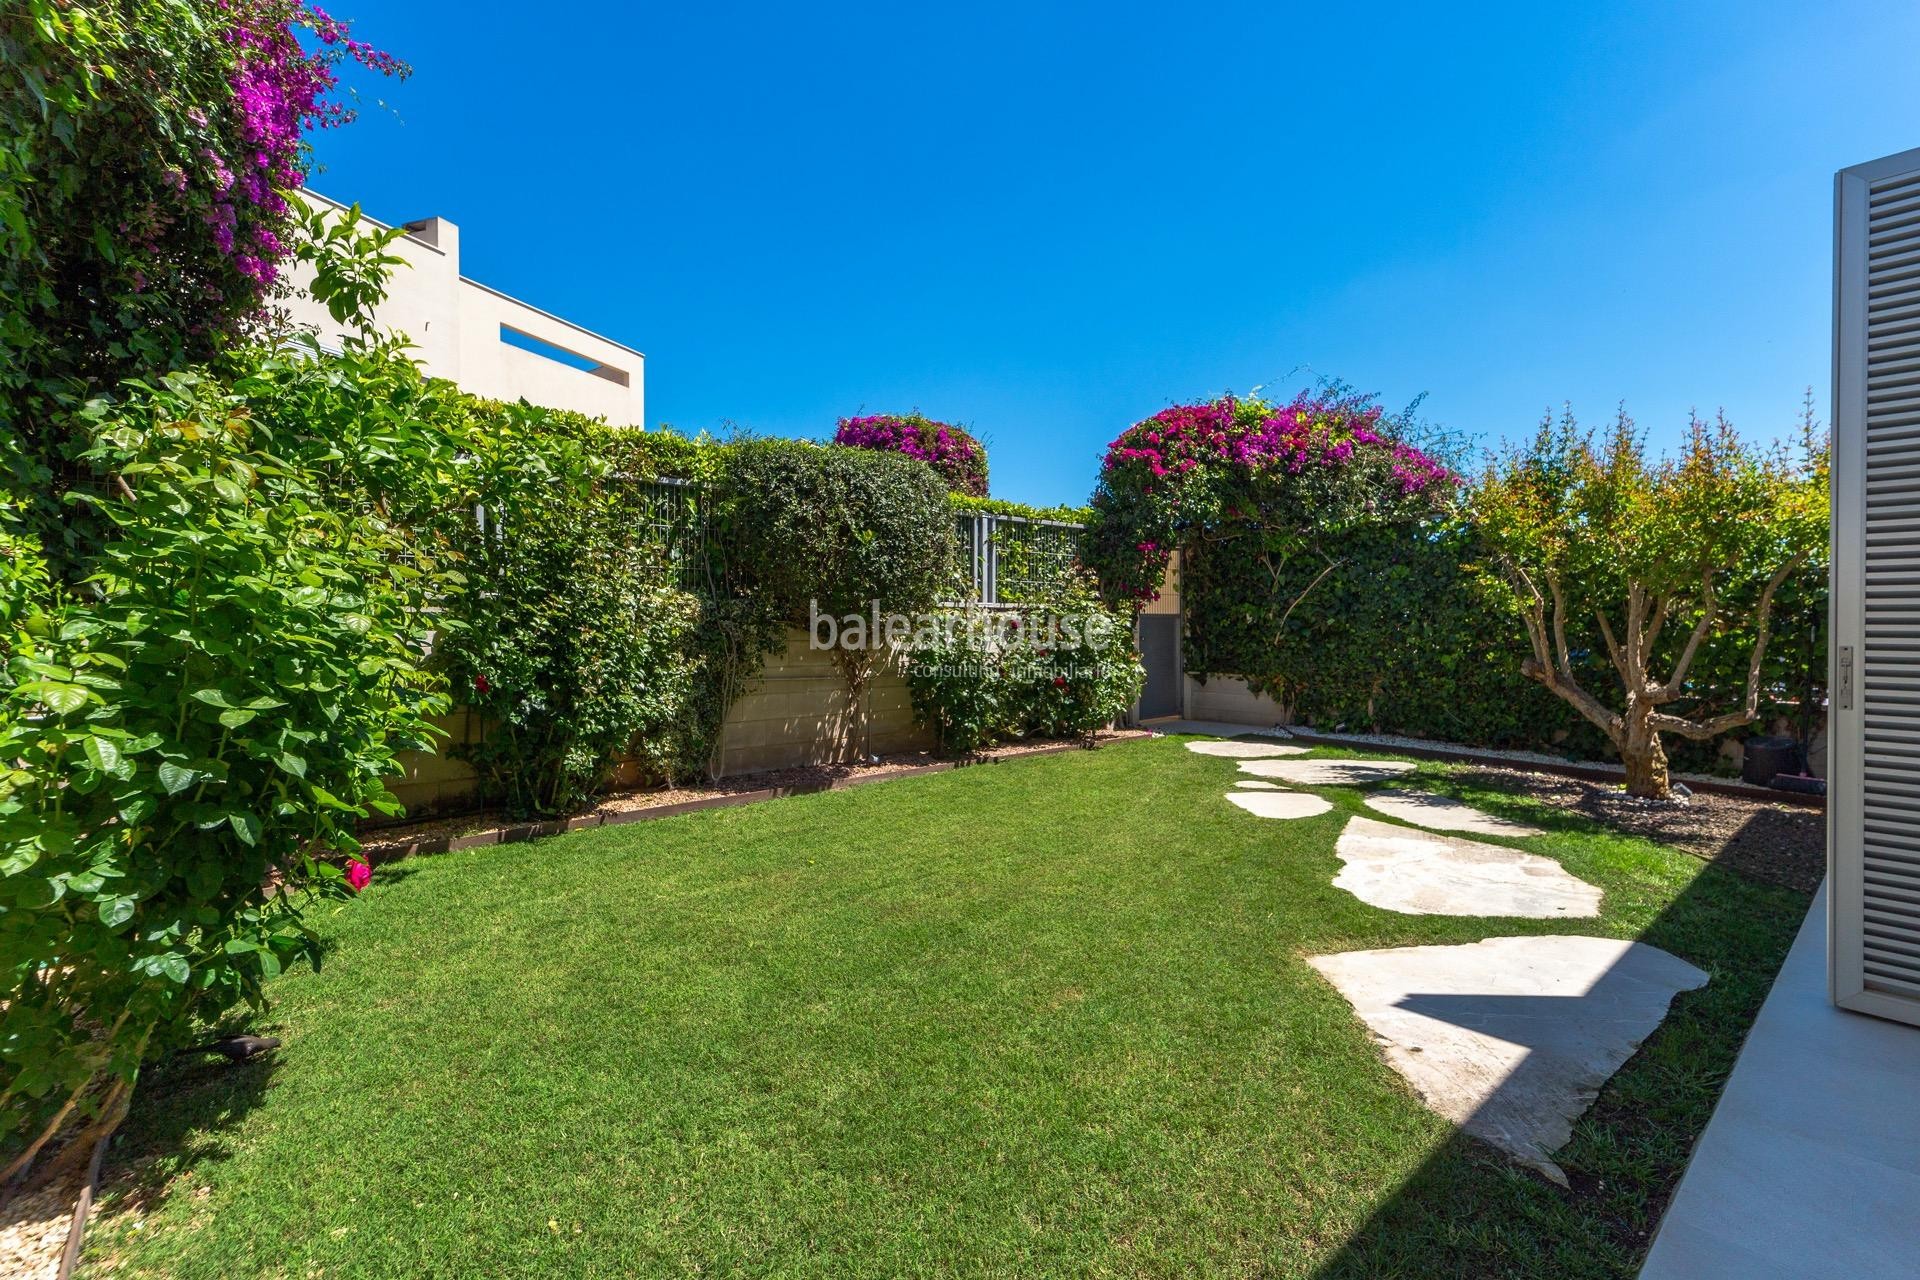 Excellent modern villa located in the privileged area of Sa Teulera, the green lung of Palma Moderna